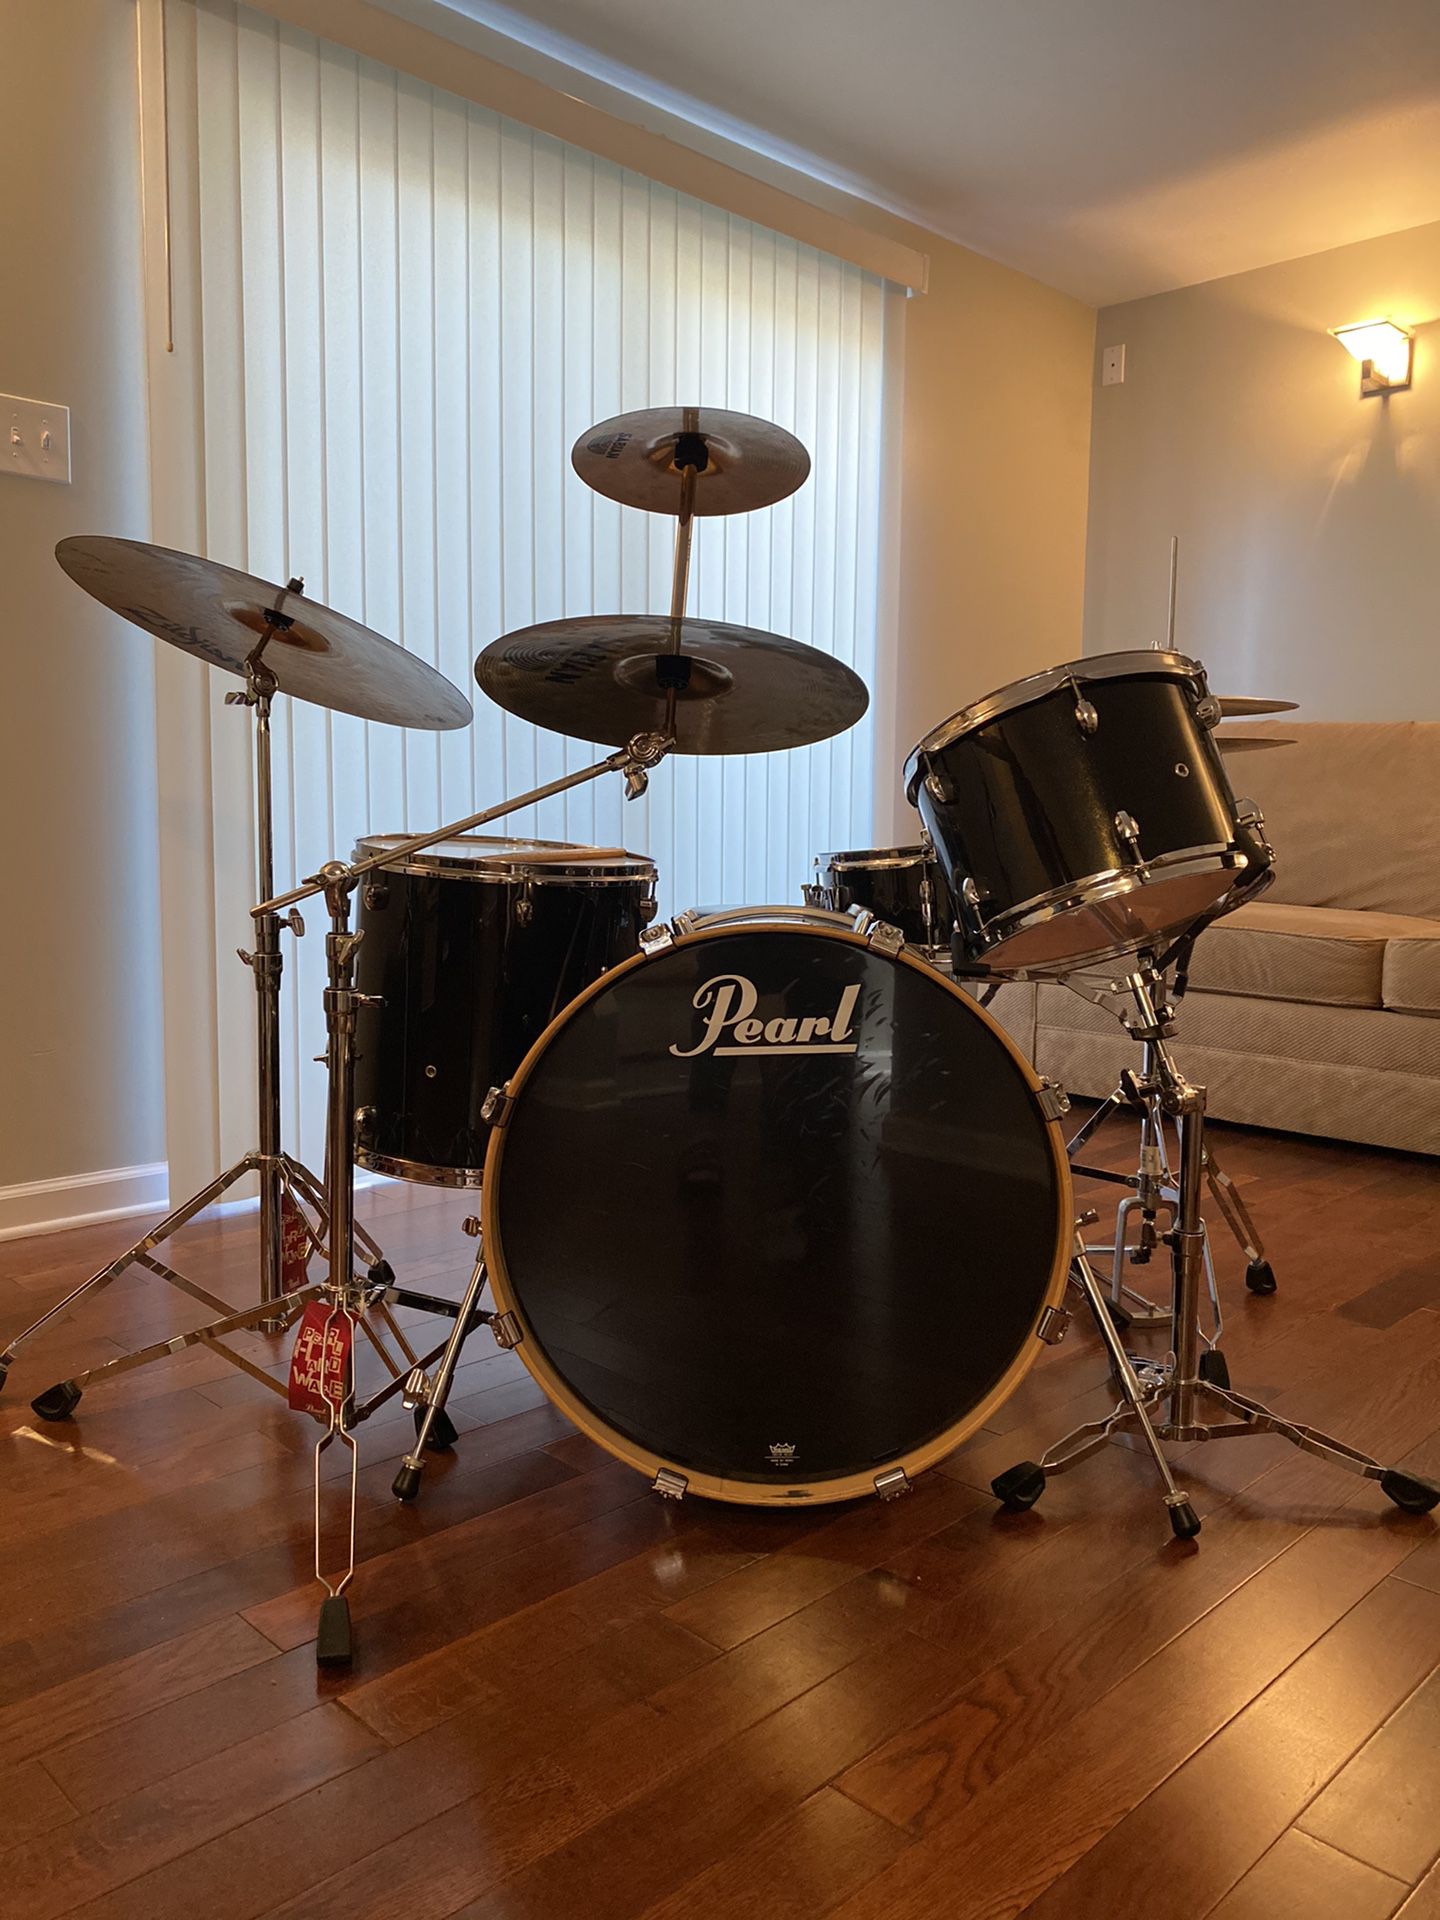 Pearl Export 4 Pc. Drum Set w/ Cymbals And Hardware Included